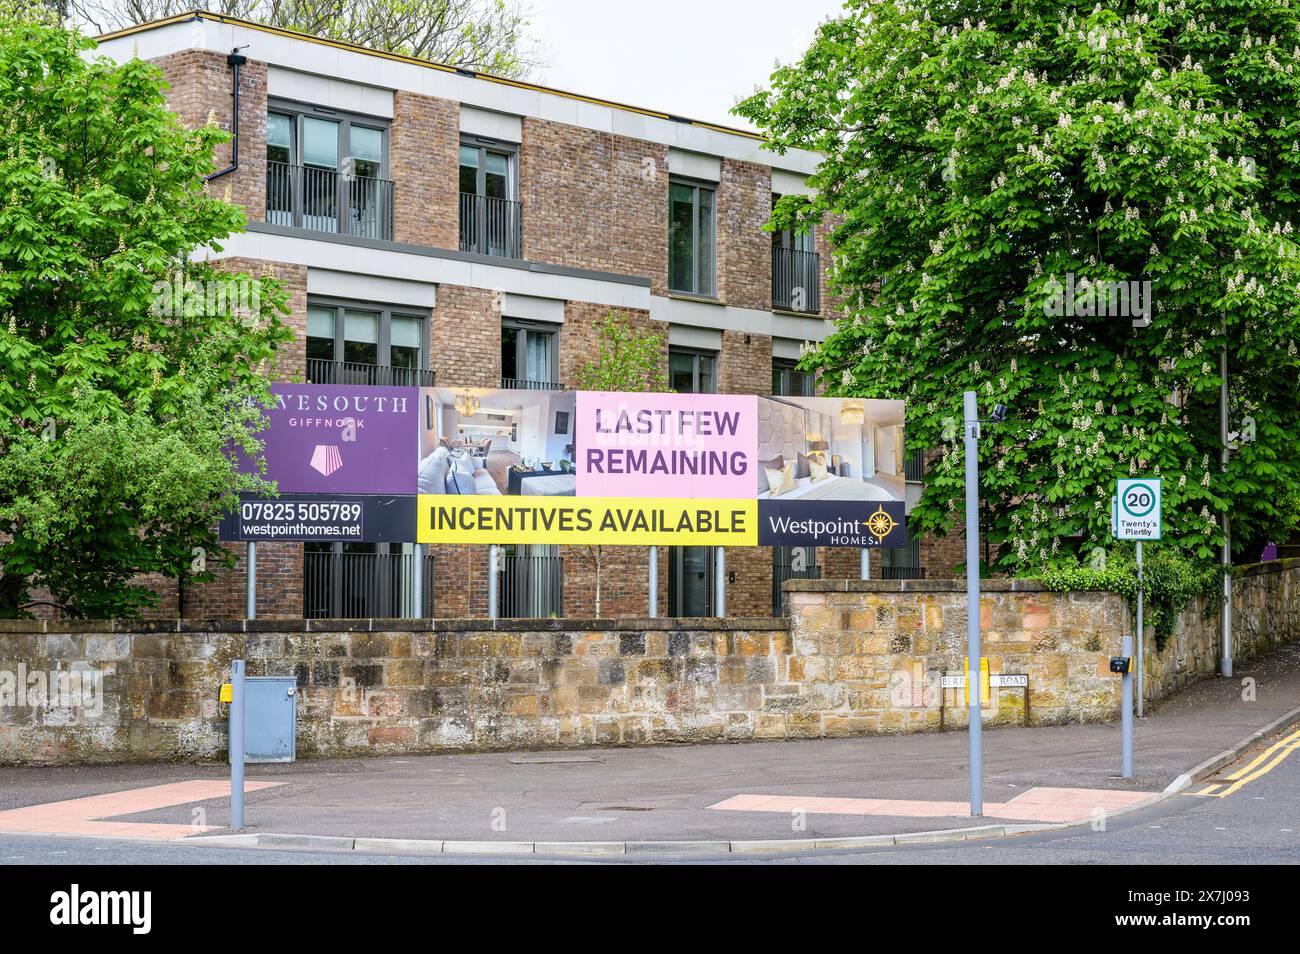 Last Few Remaining Apartments with Incentives Available sign, Berryhill Road, Giffnock, Glasgow, Scotland, UK, Europe Stock Photo